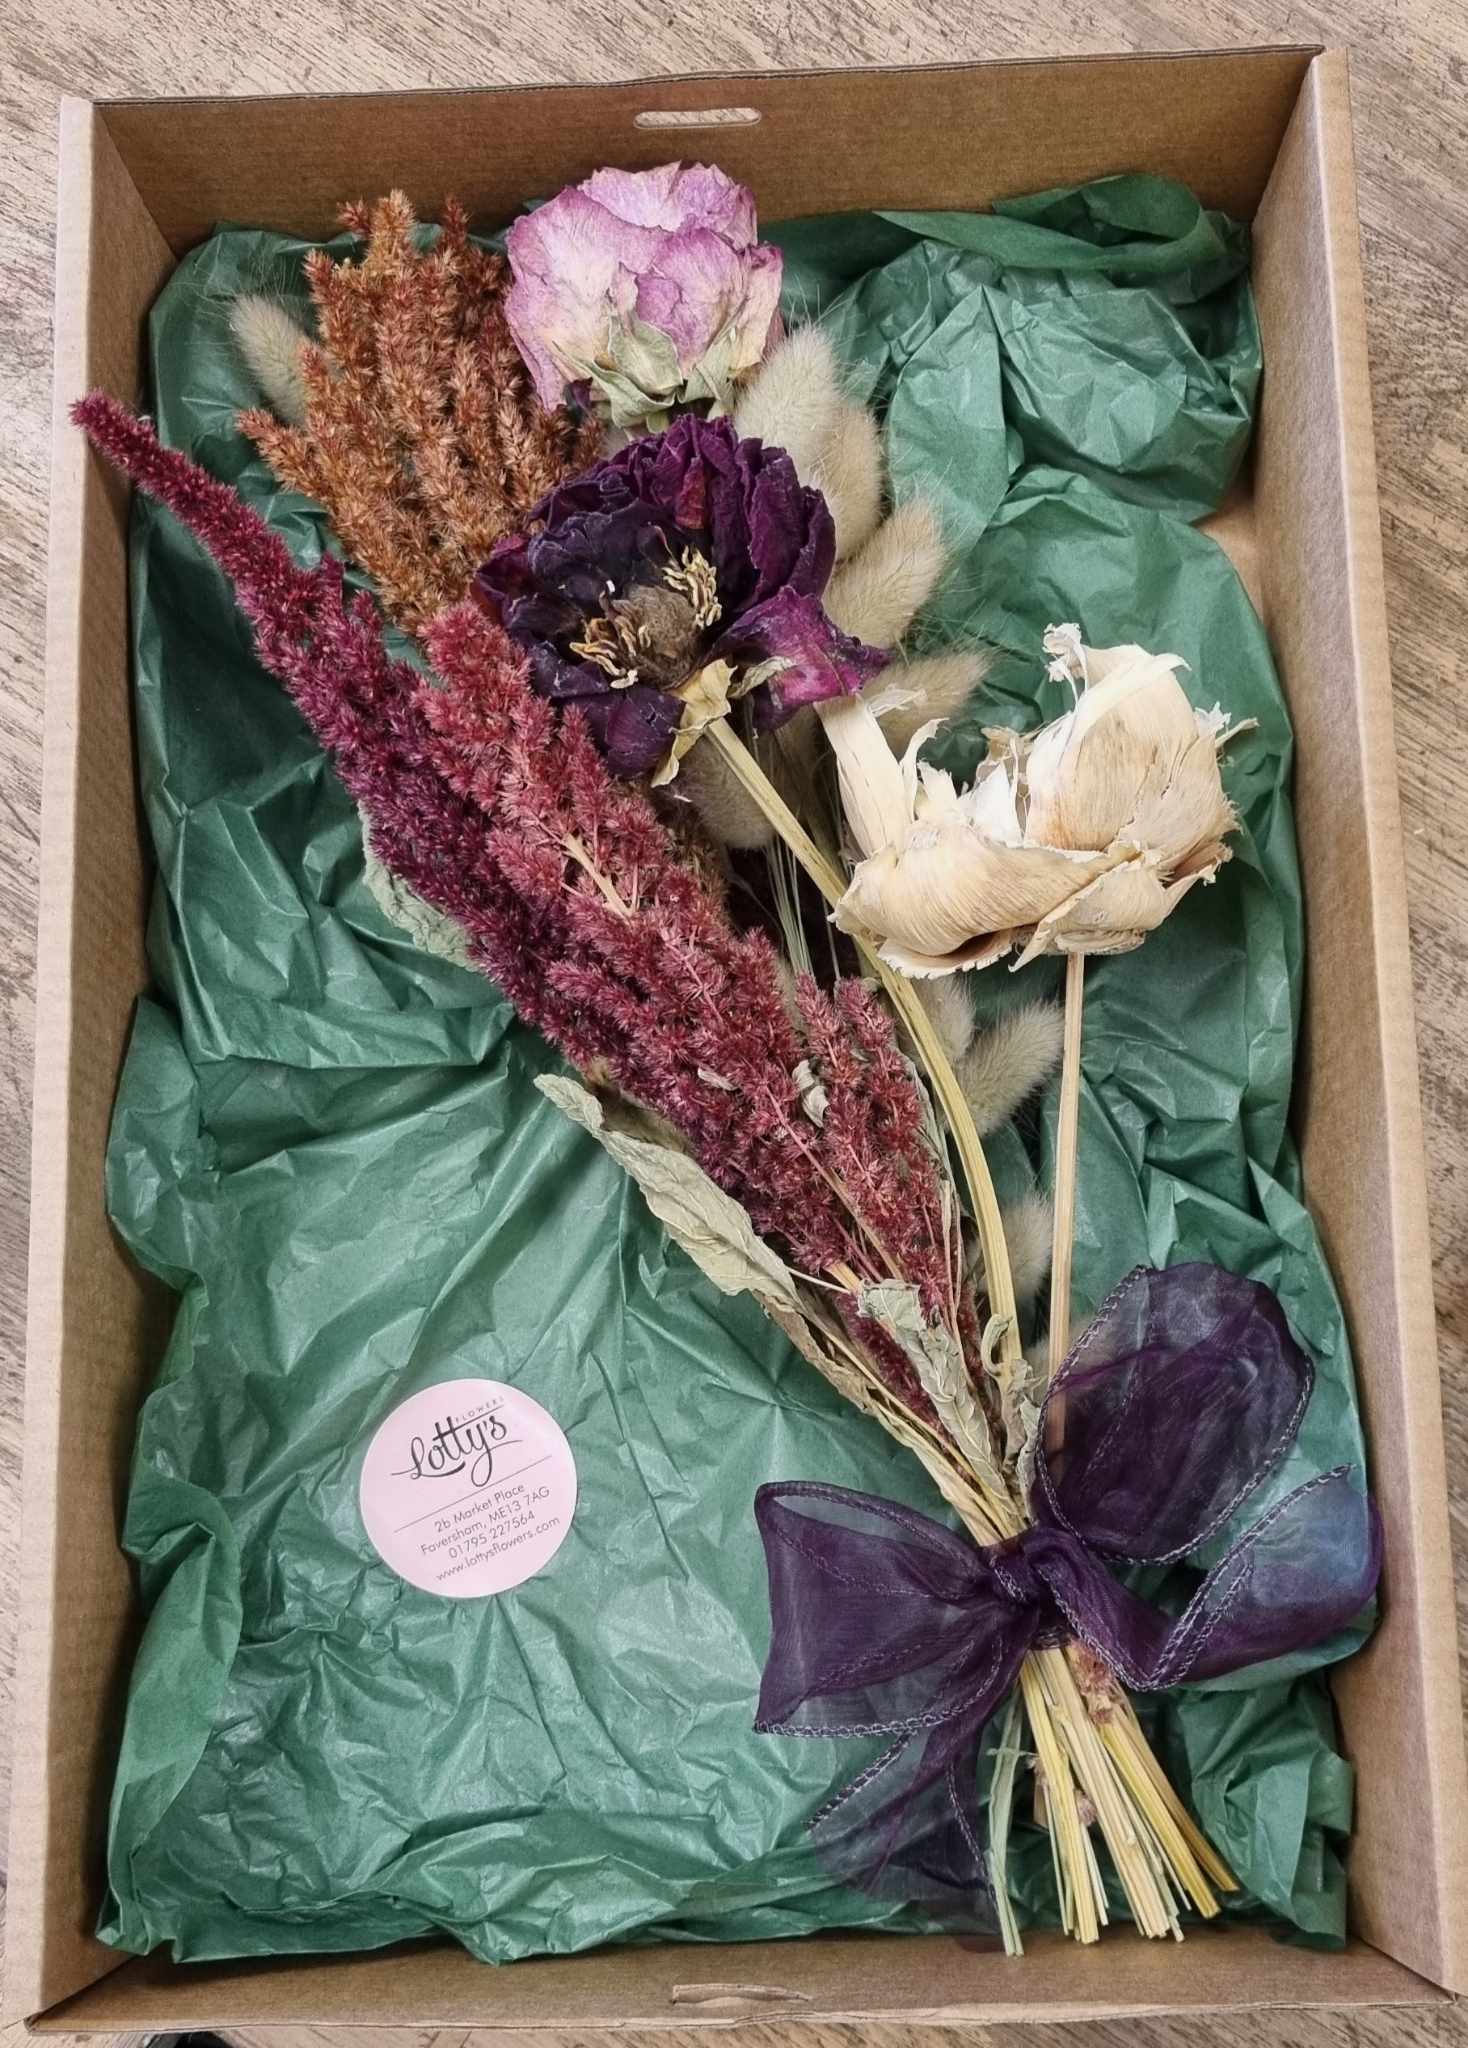 The Dried Bouquet in a Box